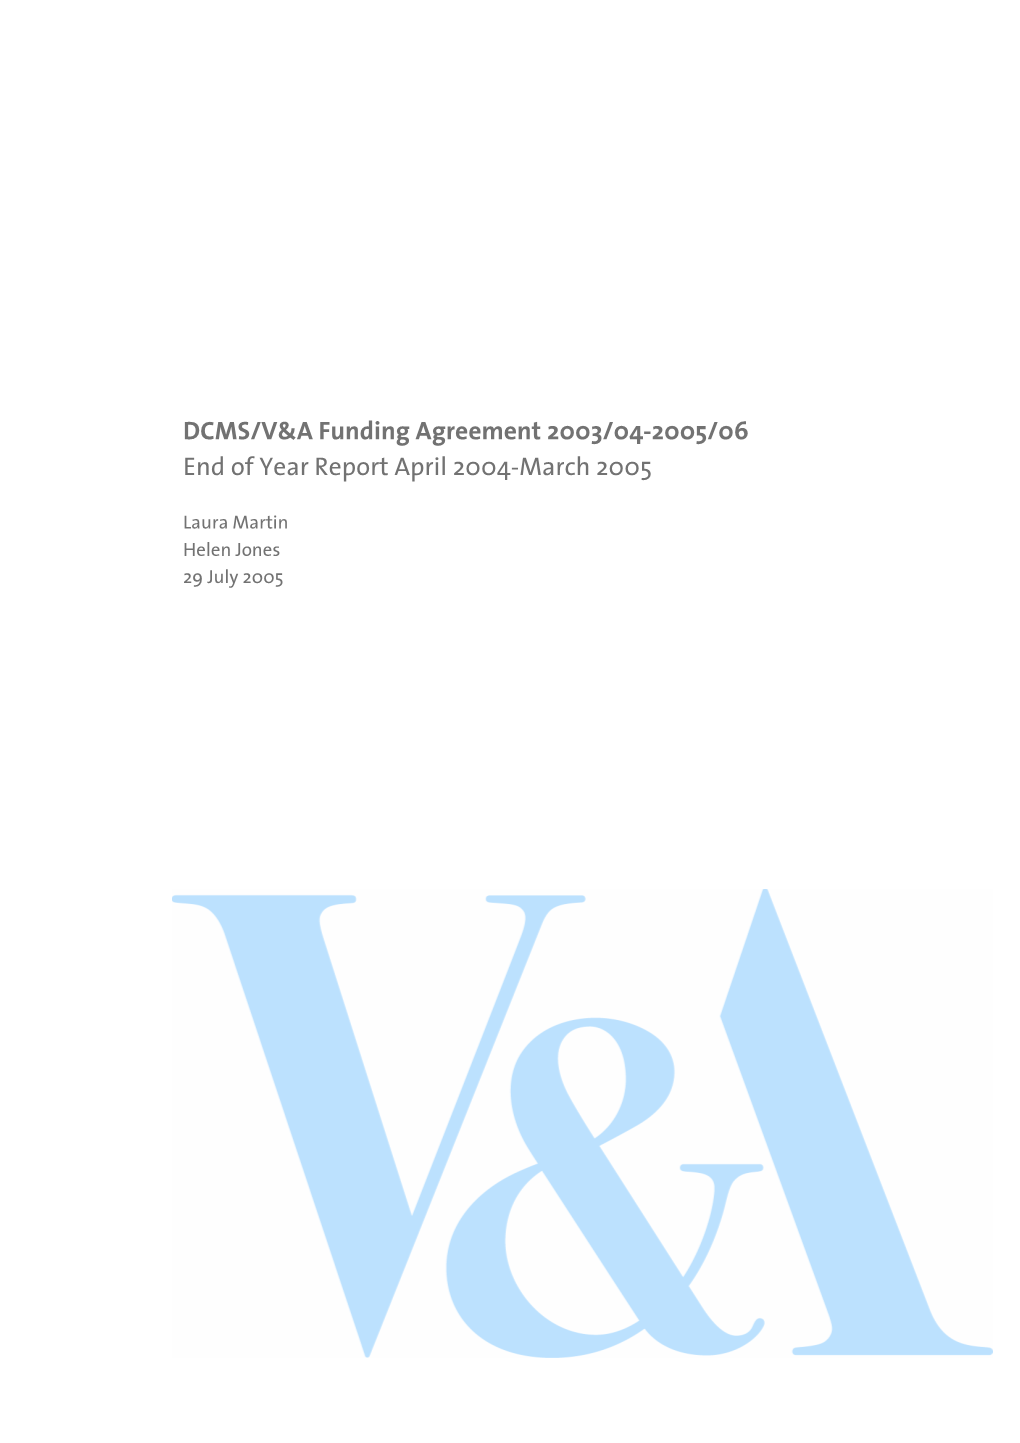 Funding Agreement End of Year Report 2004-05